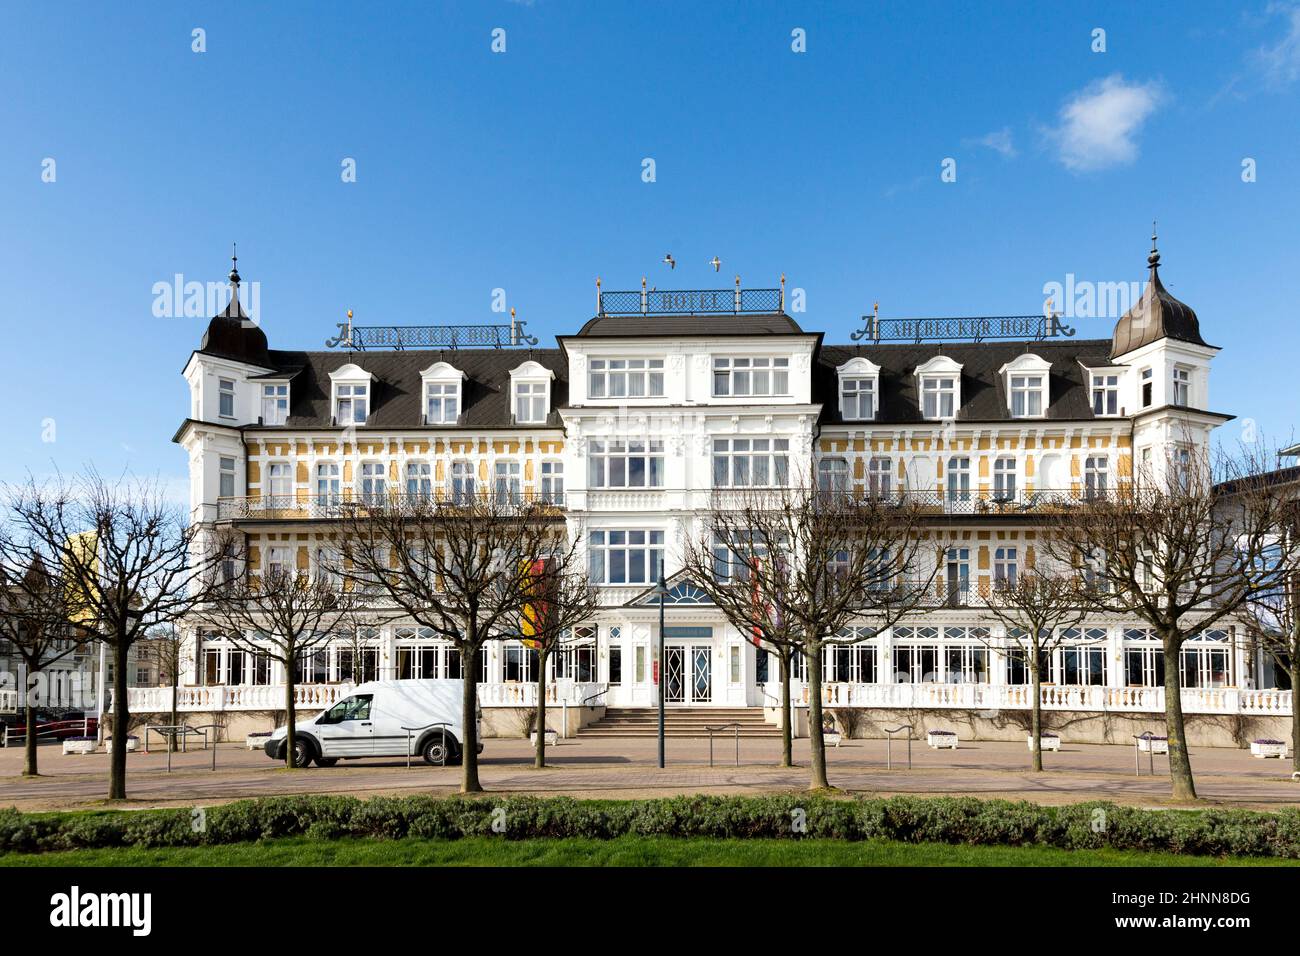 famous historic haus Ahlbecker Hof at the promenade of Ahlbeck Stock Photo